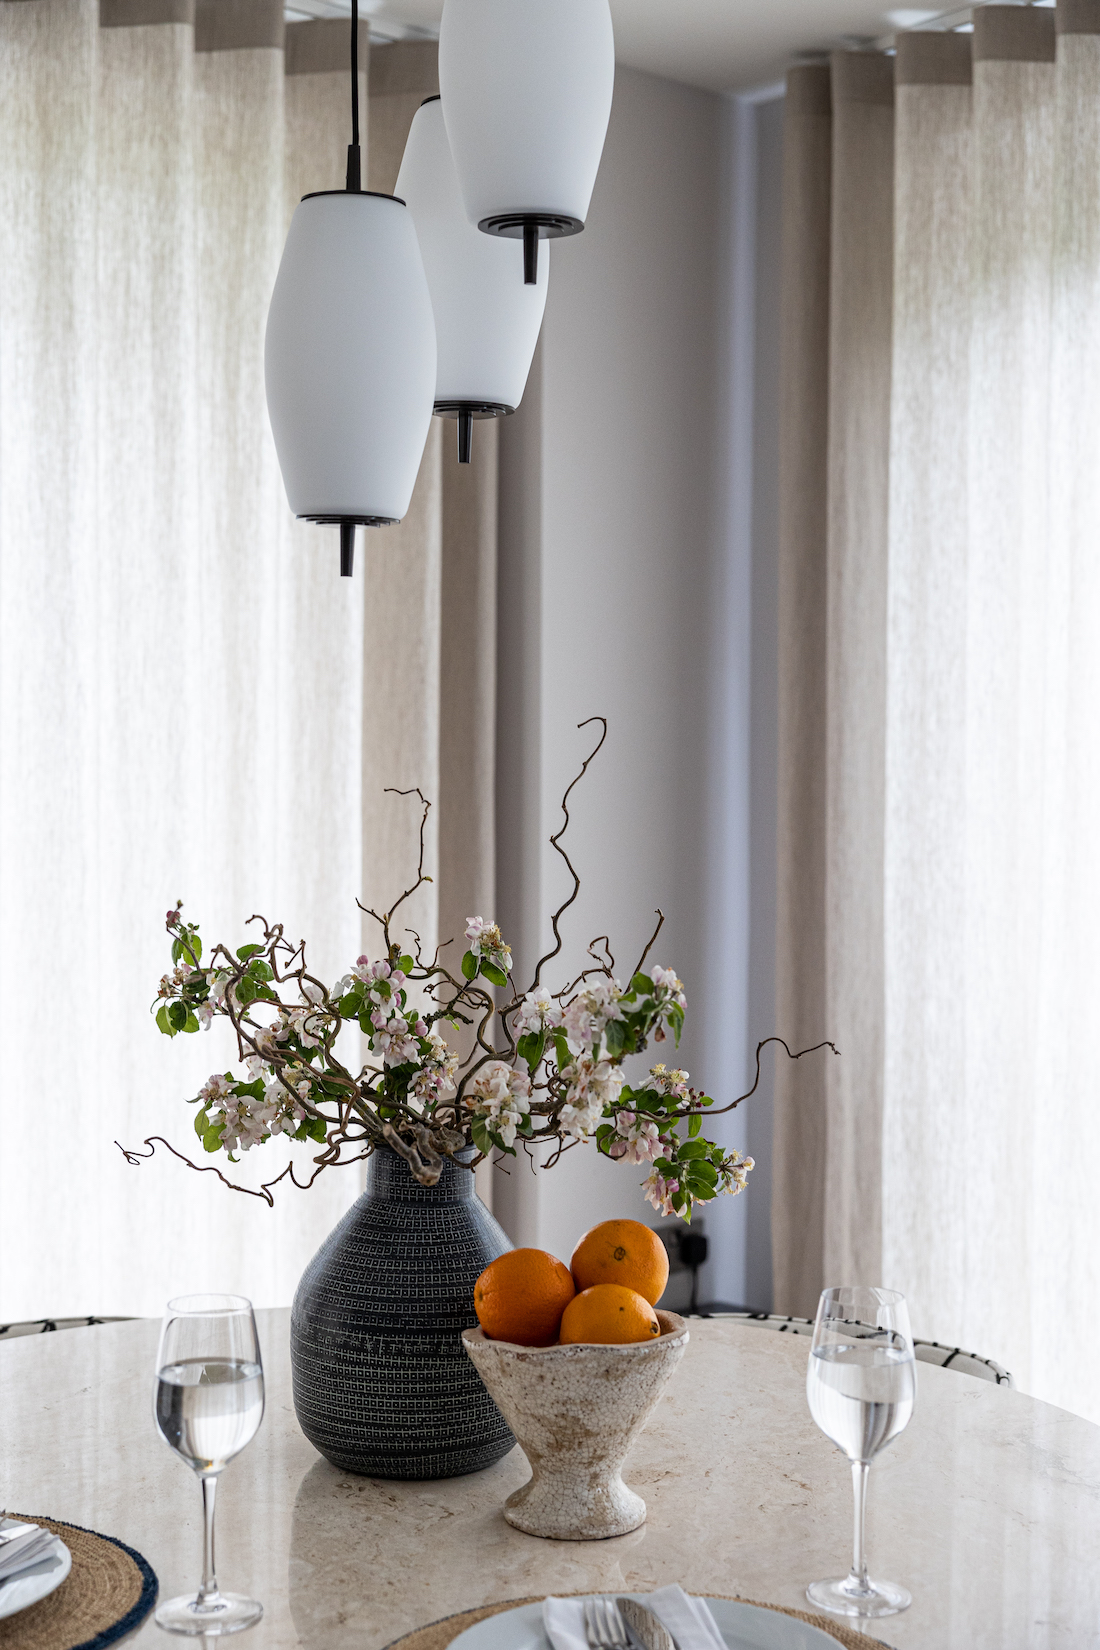 urban contemporary three glad drop pendant lights over a dining table with a bunch of cherry blossoms in a vase, a table setting for two and a bowl of oranges